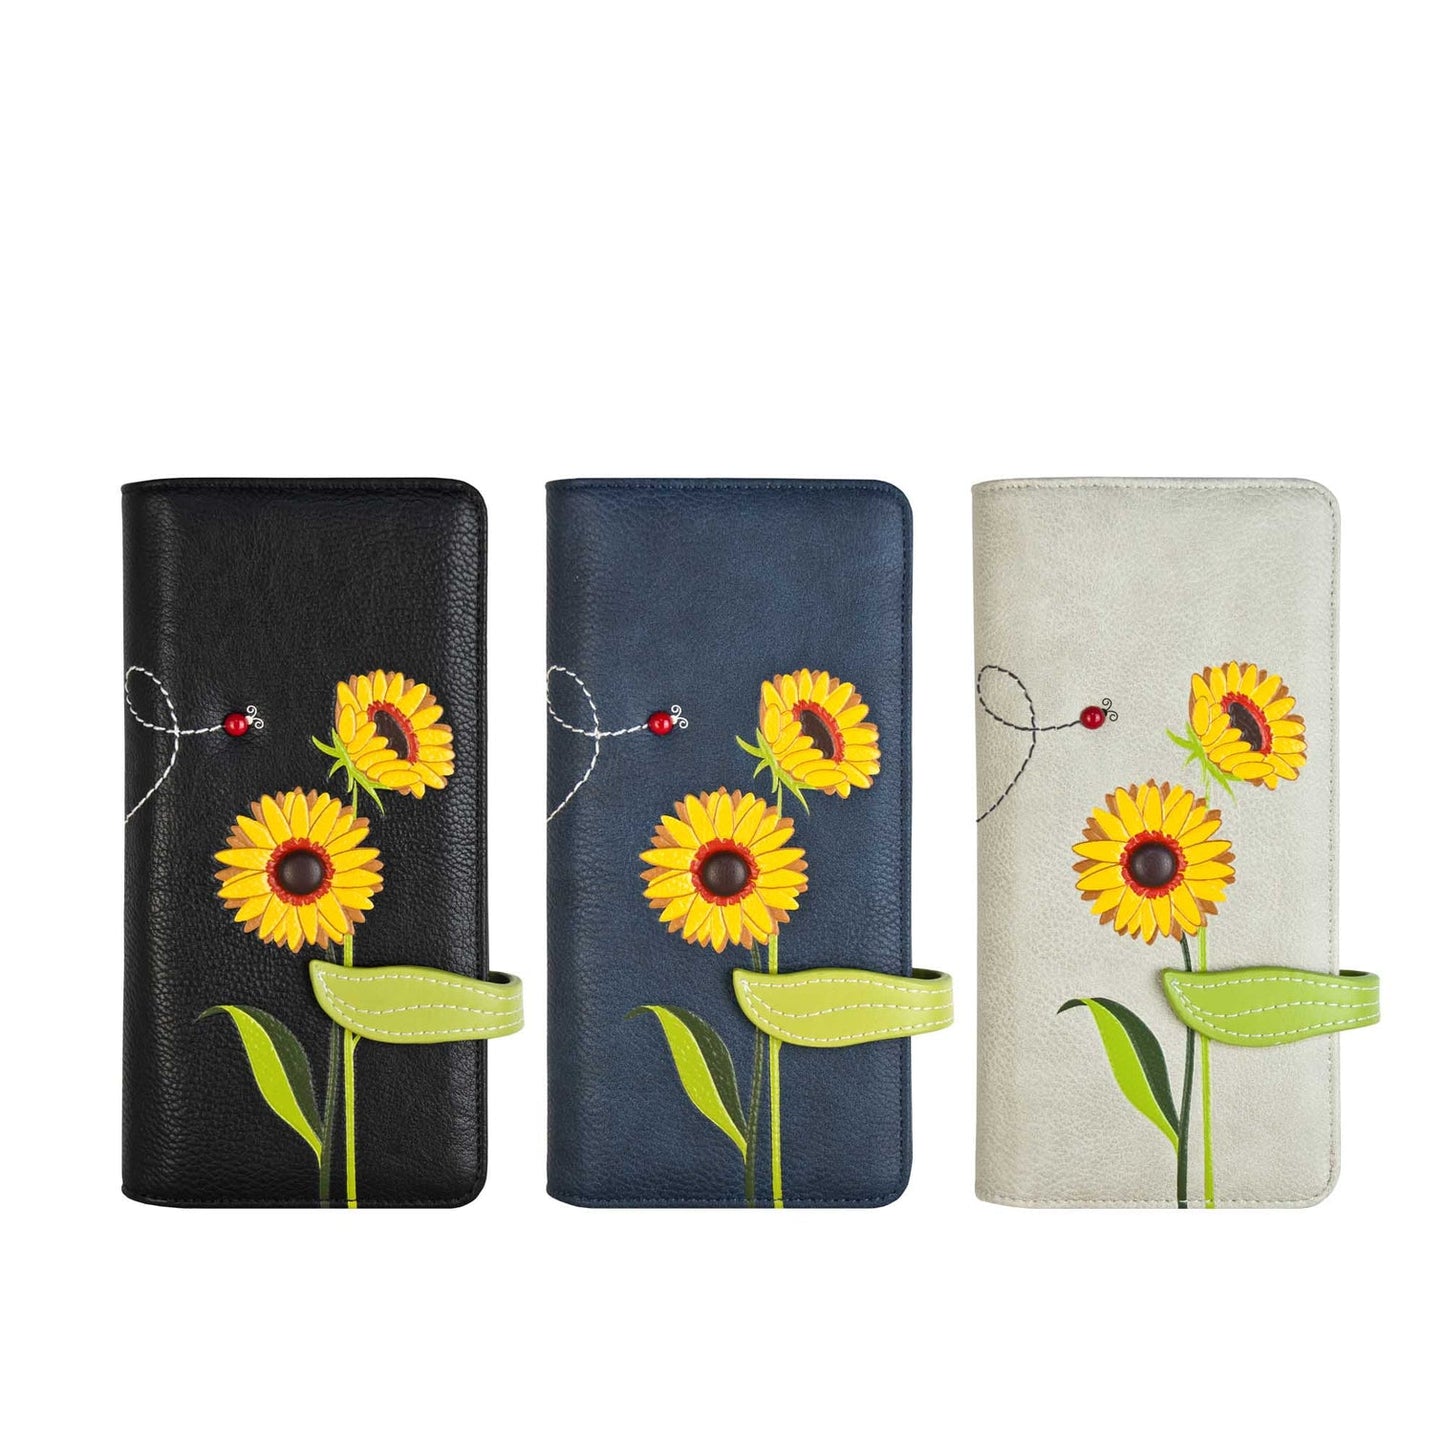 ESPE Sunflower Vegan Leather Long Wallet with Blooming Sunflower Motif